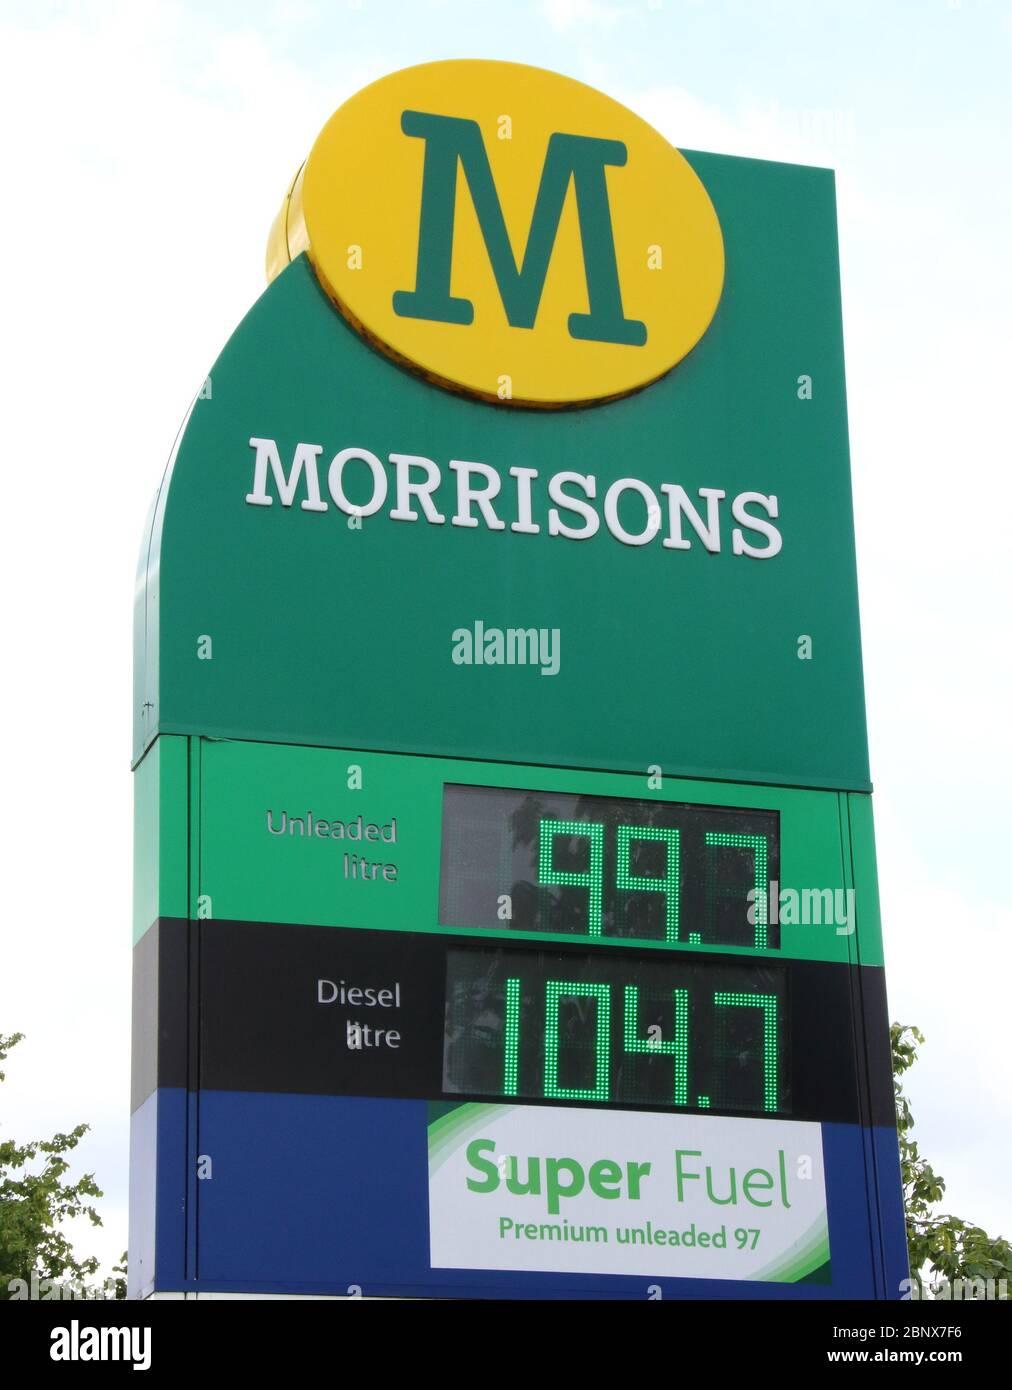 A Morrisons petrol station sells unleaded petrol at 99.7p per litre, the first time since 2016 petrol has been sold below £1 per litre.The global oil market crash triggered by the coronavirus lockdown has seen the crude oil price plummet to a near 20-year low. Now, led by UK Supermarket chains, Unleaded petrol is now on sale throughout the country at below £1 per litre. Stock Photo